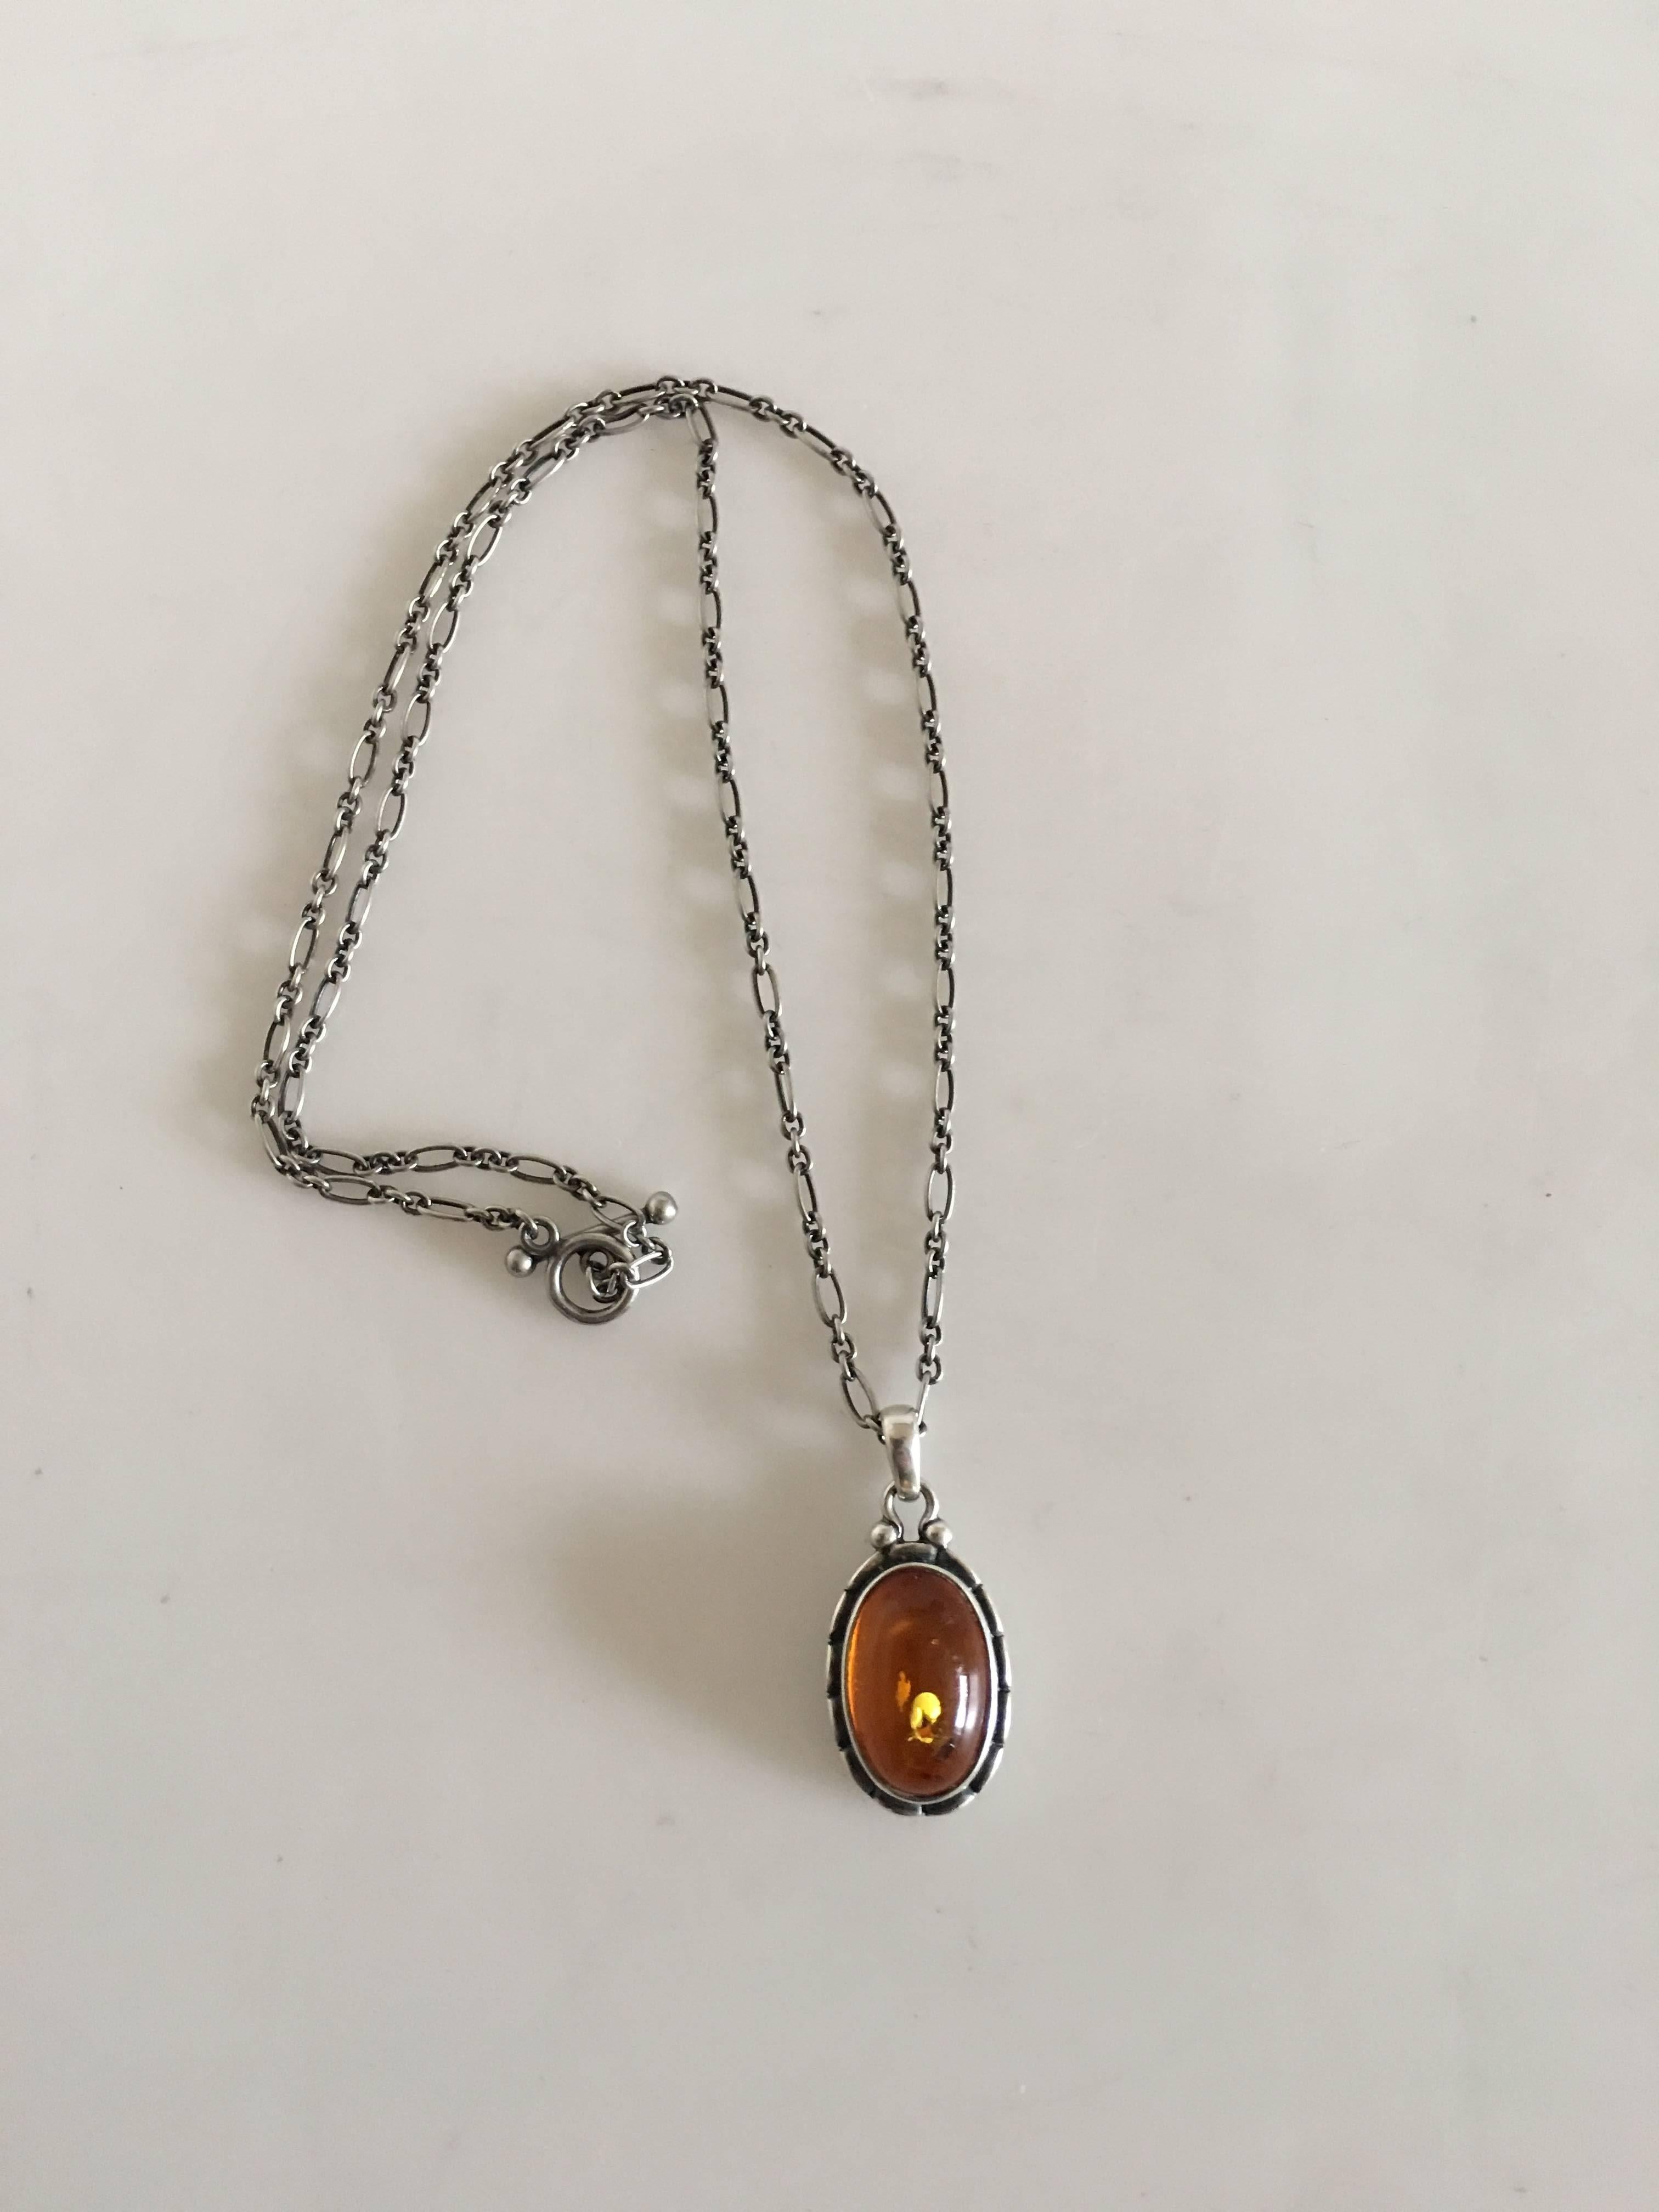 Danish Georg Jensen Annual Pendent in Sterling Silver with Amber Stone, 2001